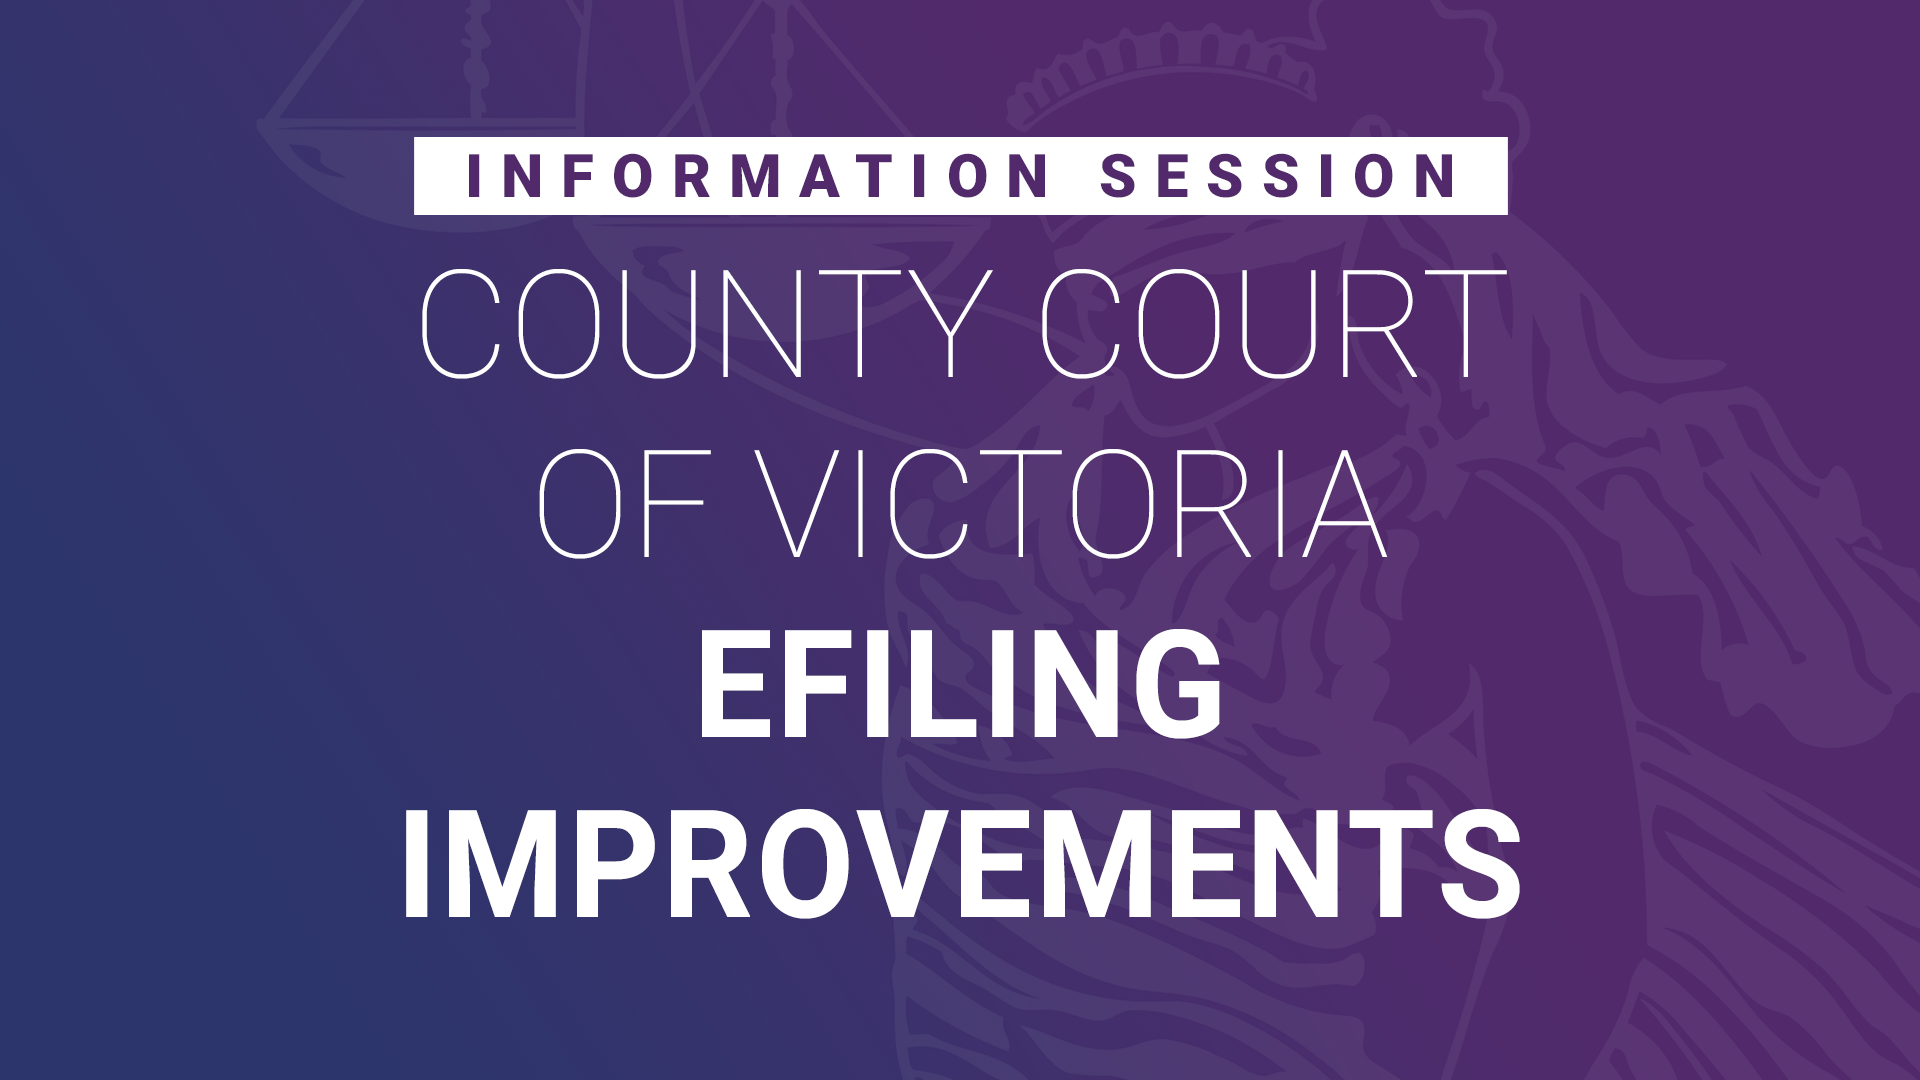 Information session - County Court of Victoria eFiling improvements